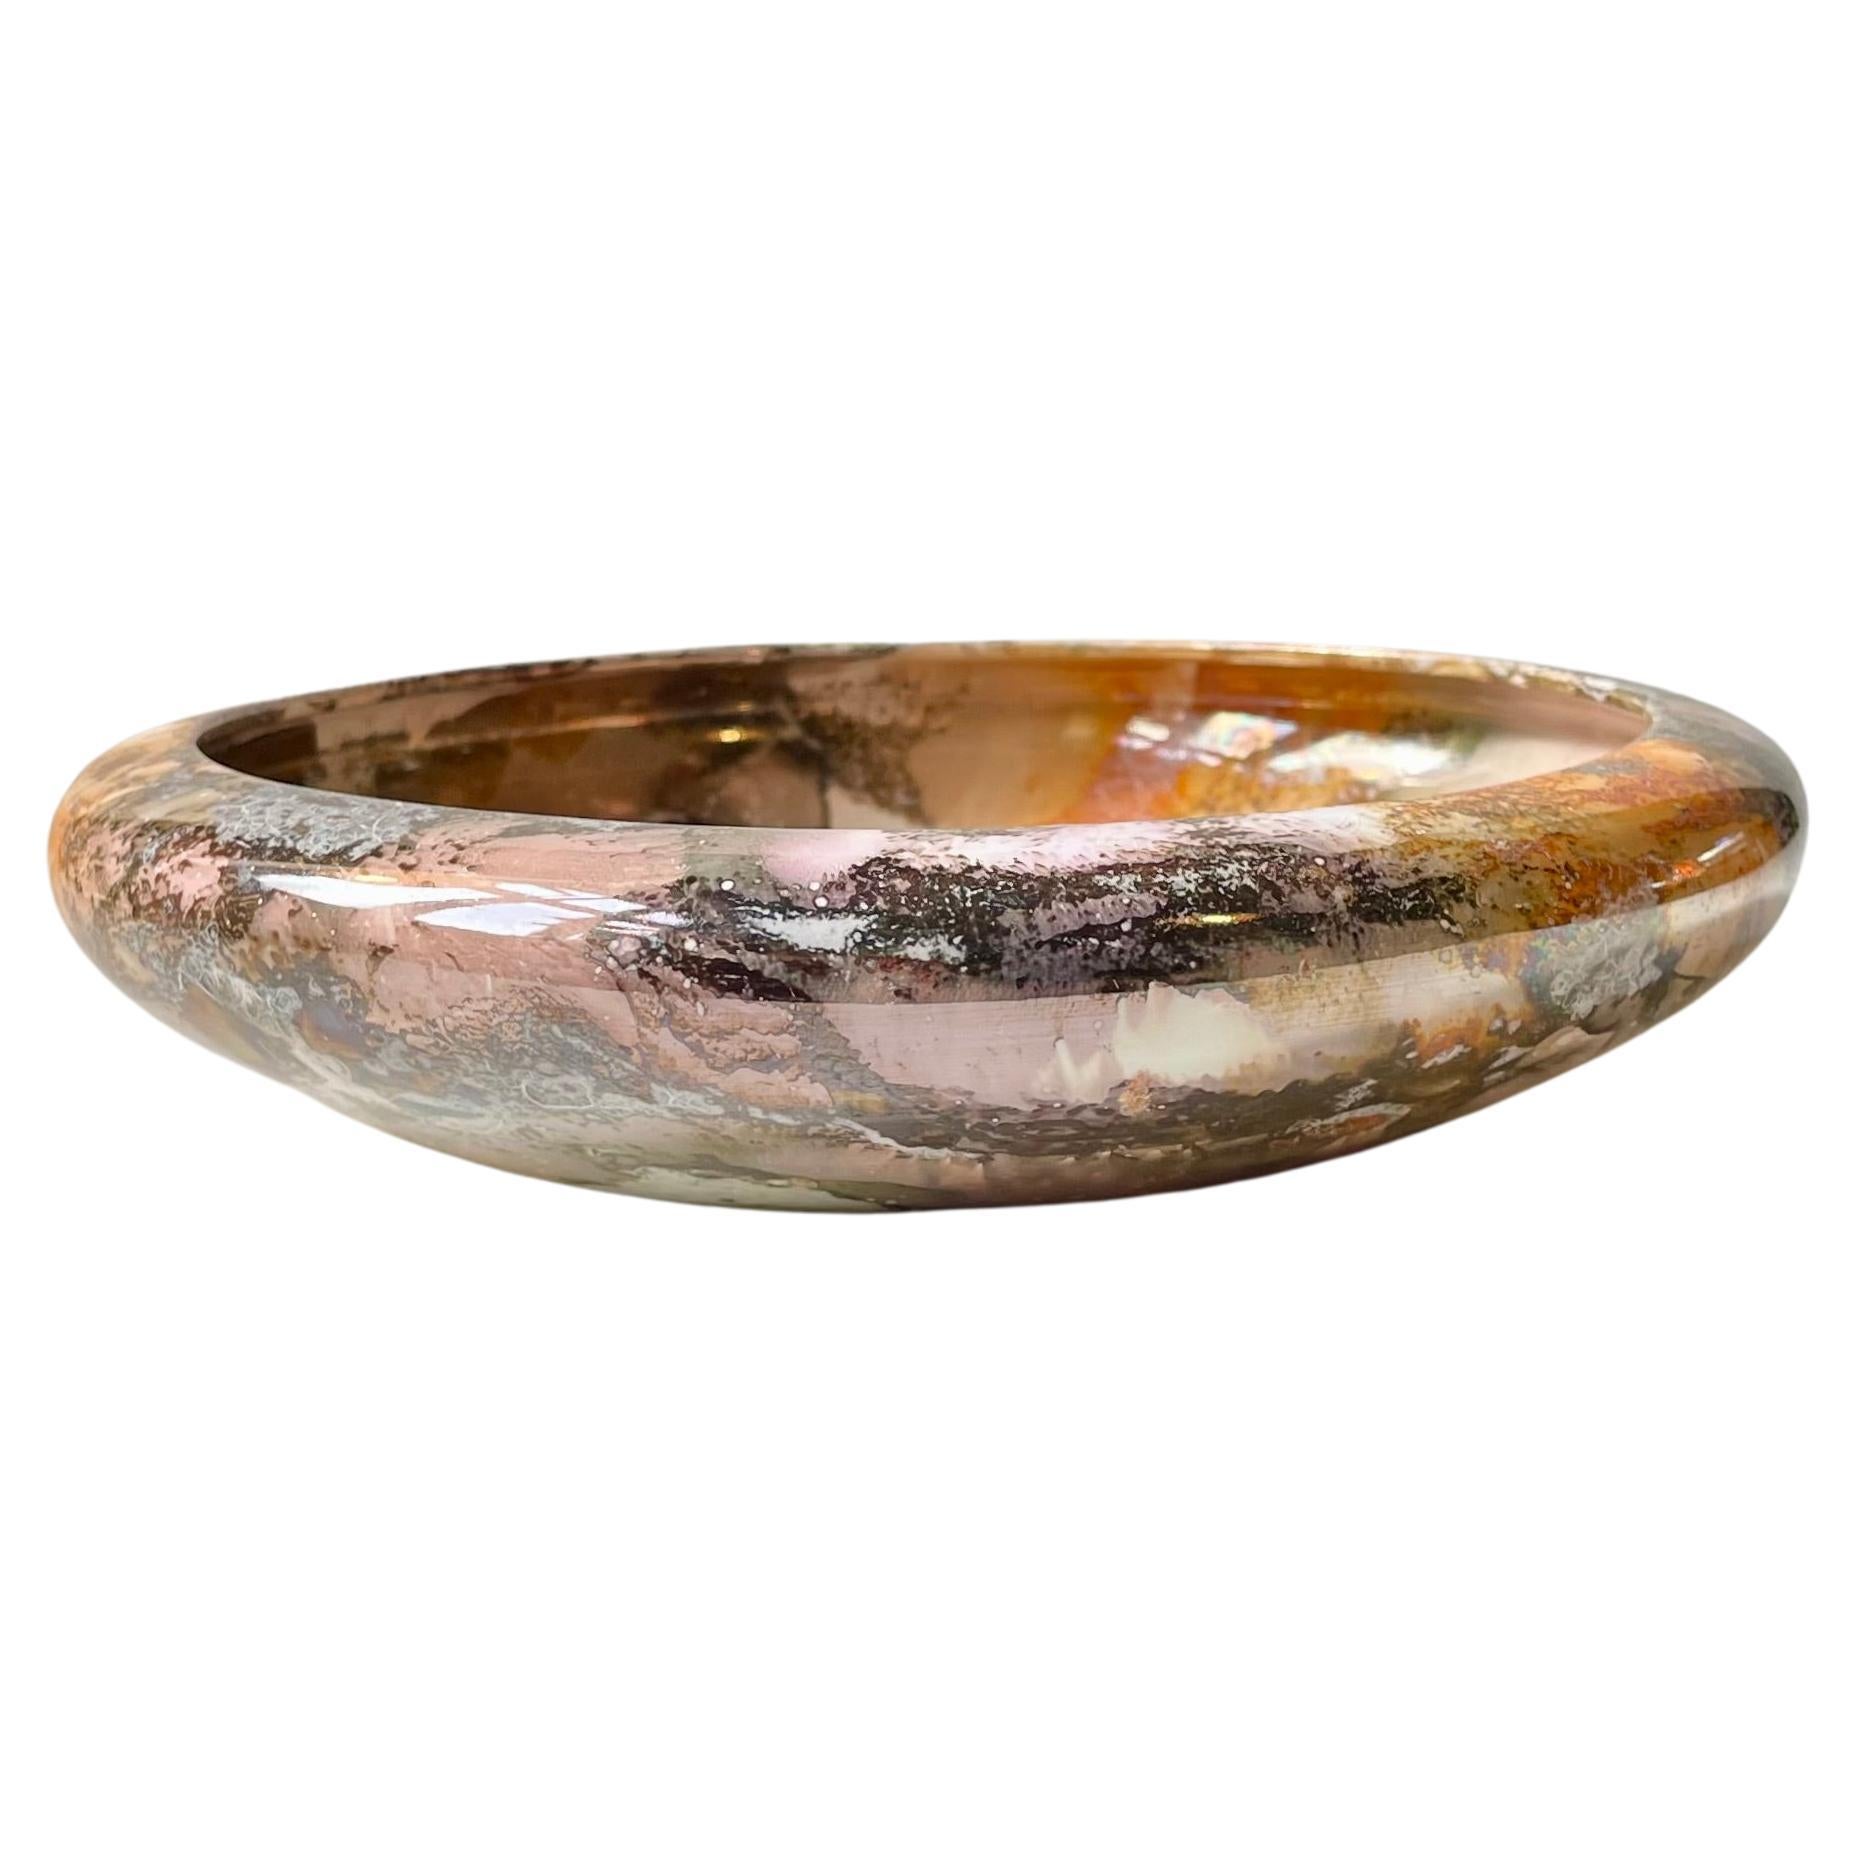 Art Deco Marble Glaze Faience Bowl by Arabia Finland, 1920s For Sale